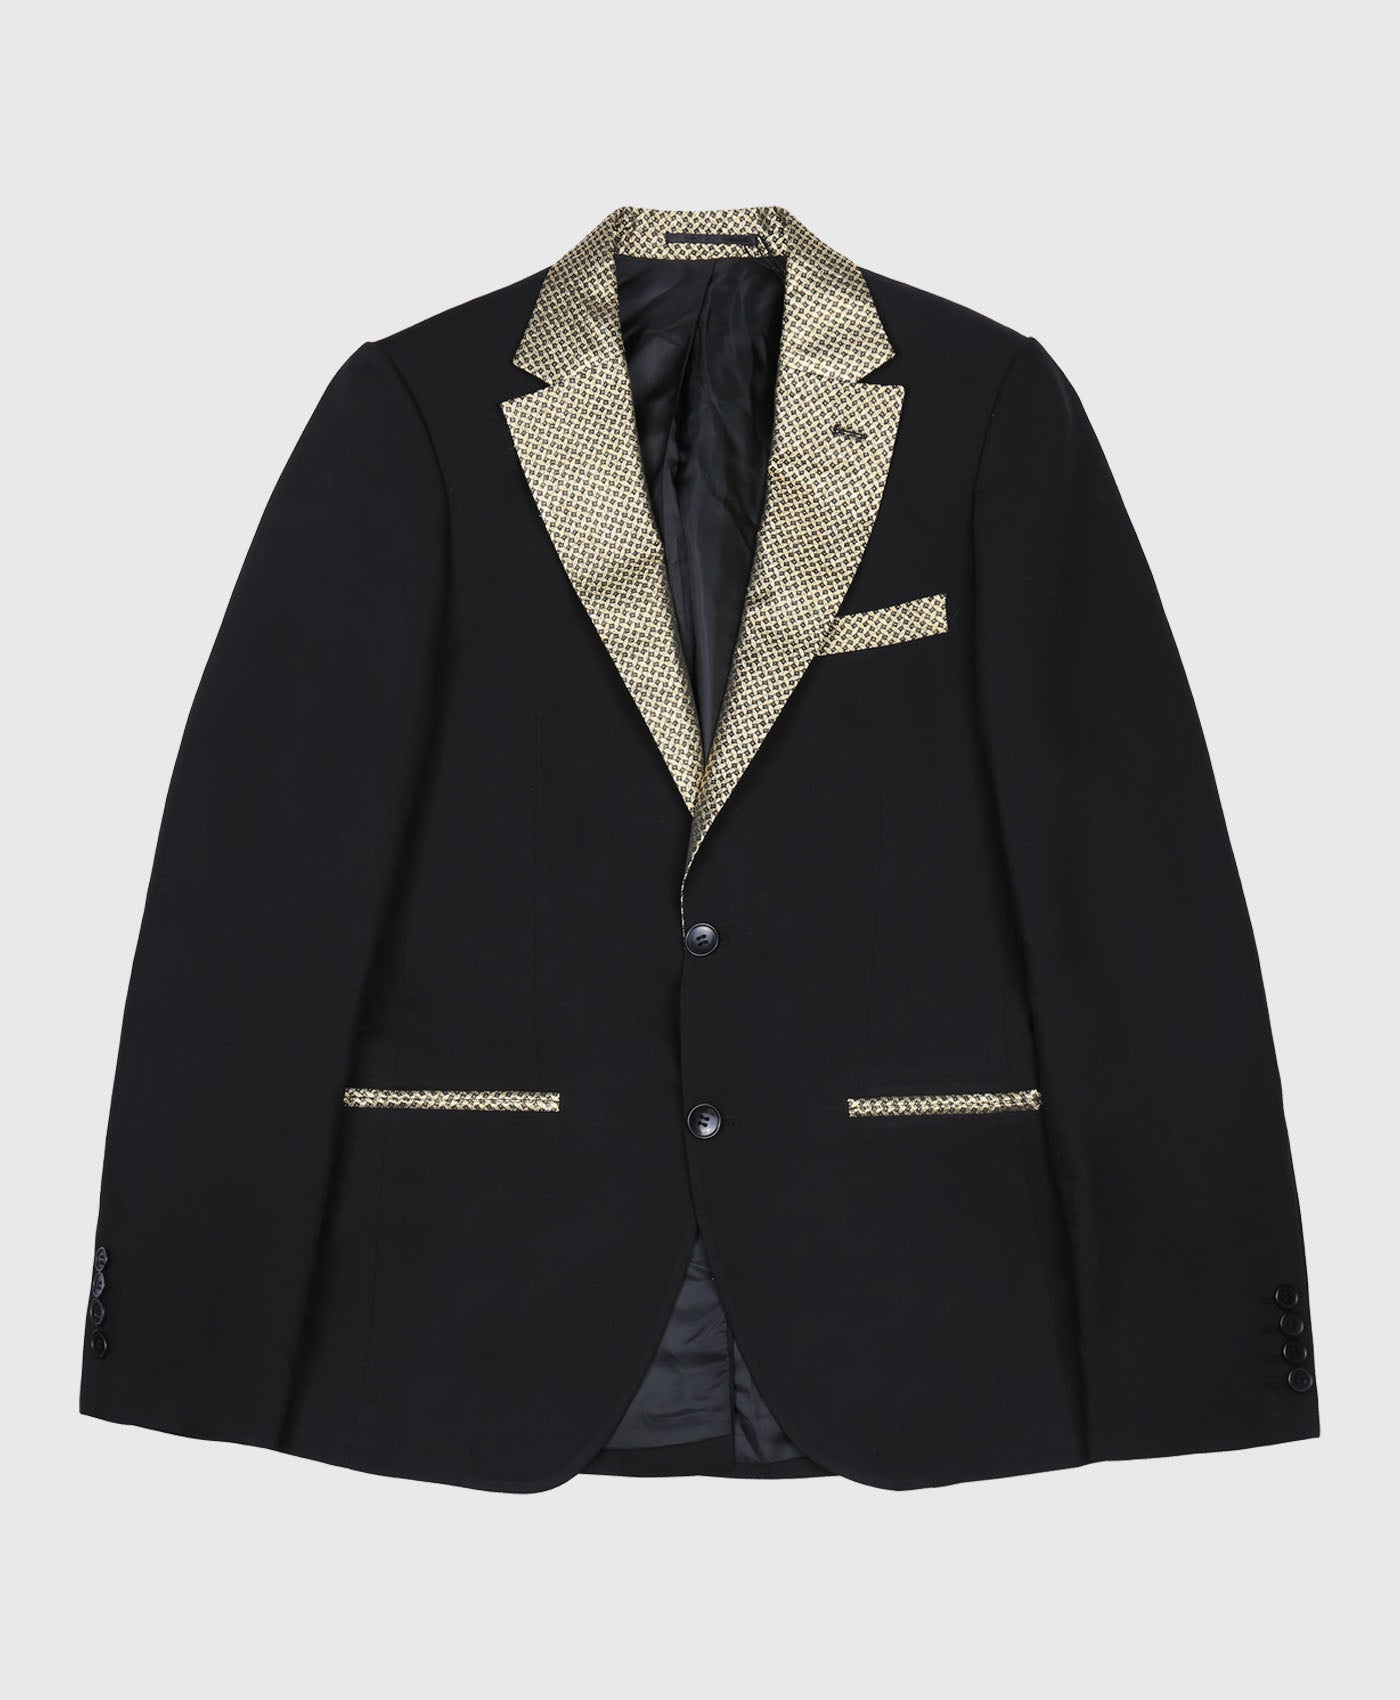 Suit Jacket In Black With Gold Contrast Lapels